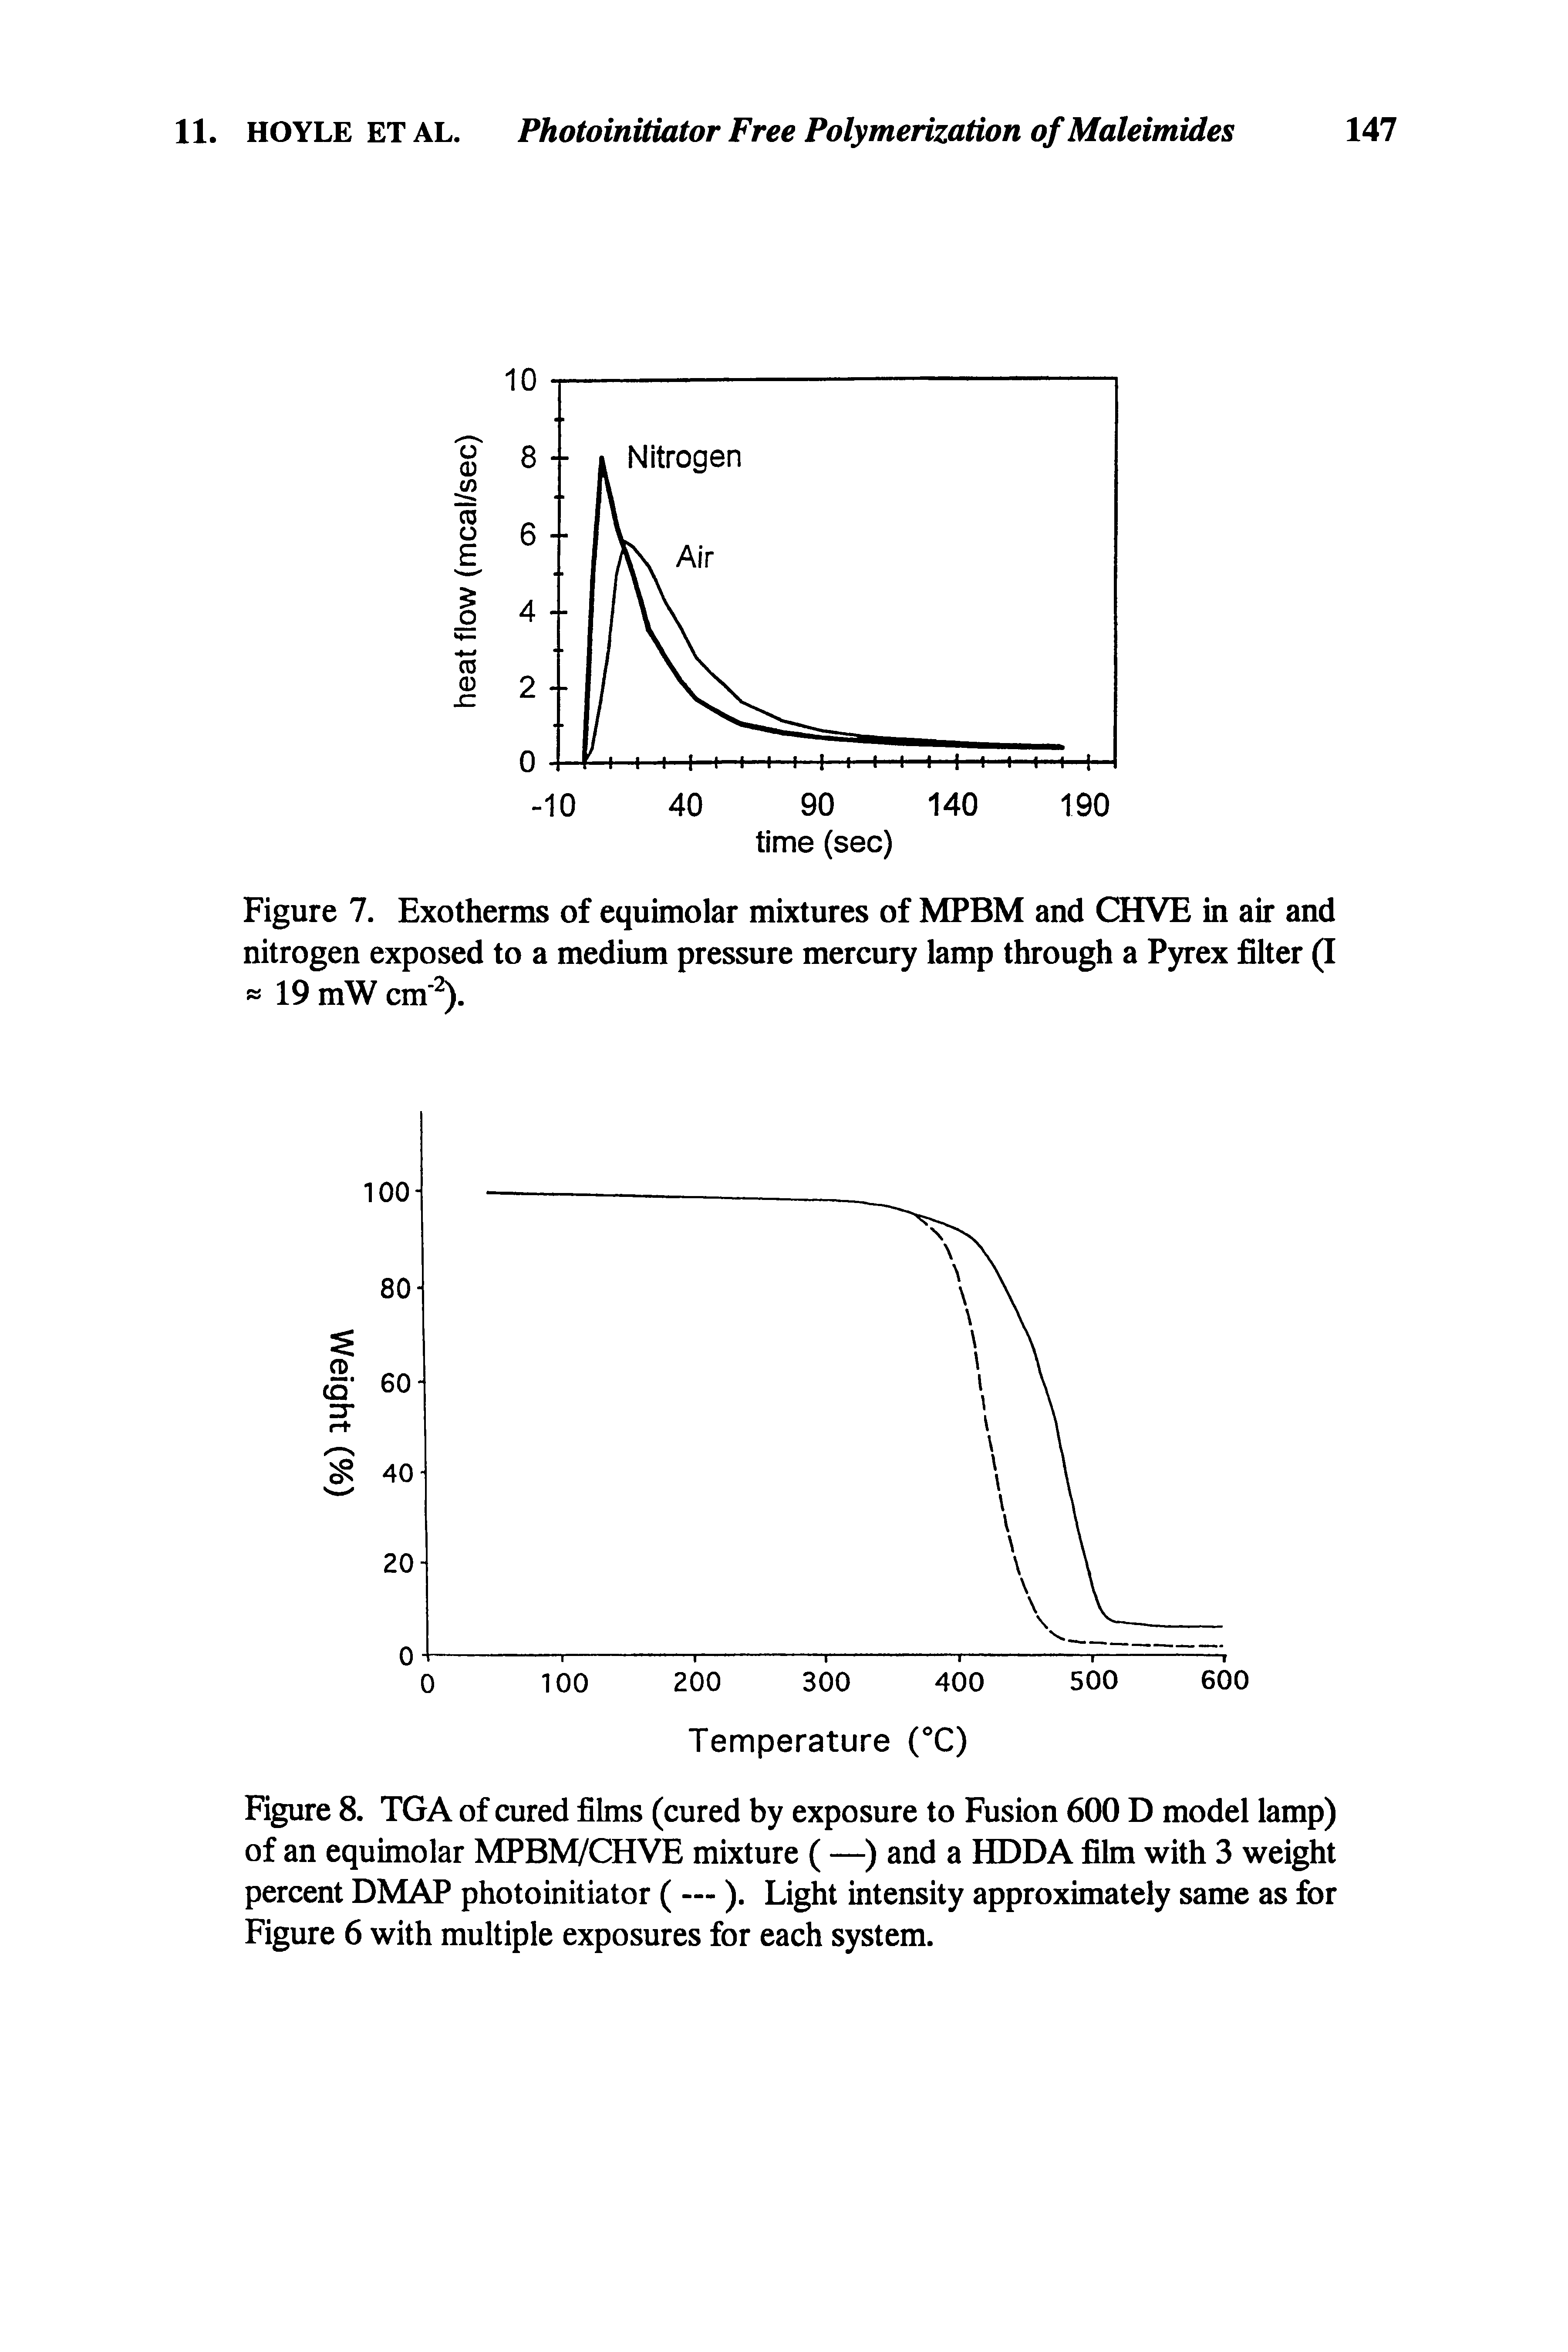 Figure 7. Exotherms of equimolar mixtures of MPBM and CHVE in air and nitrogen exposed to a medium pressure mercury lamp through a Pyrex filter (I 19 mW cm 2).